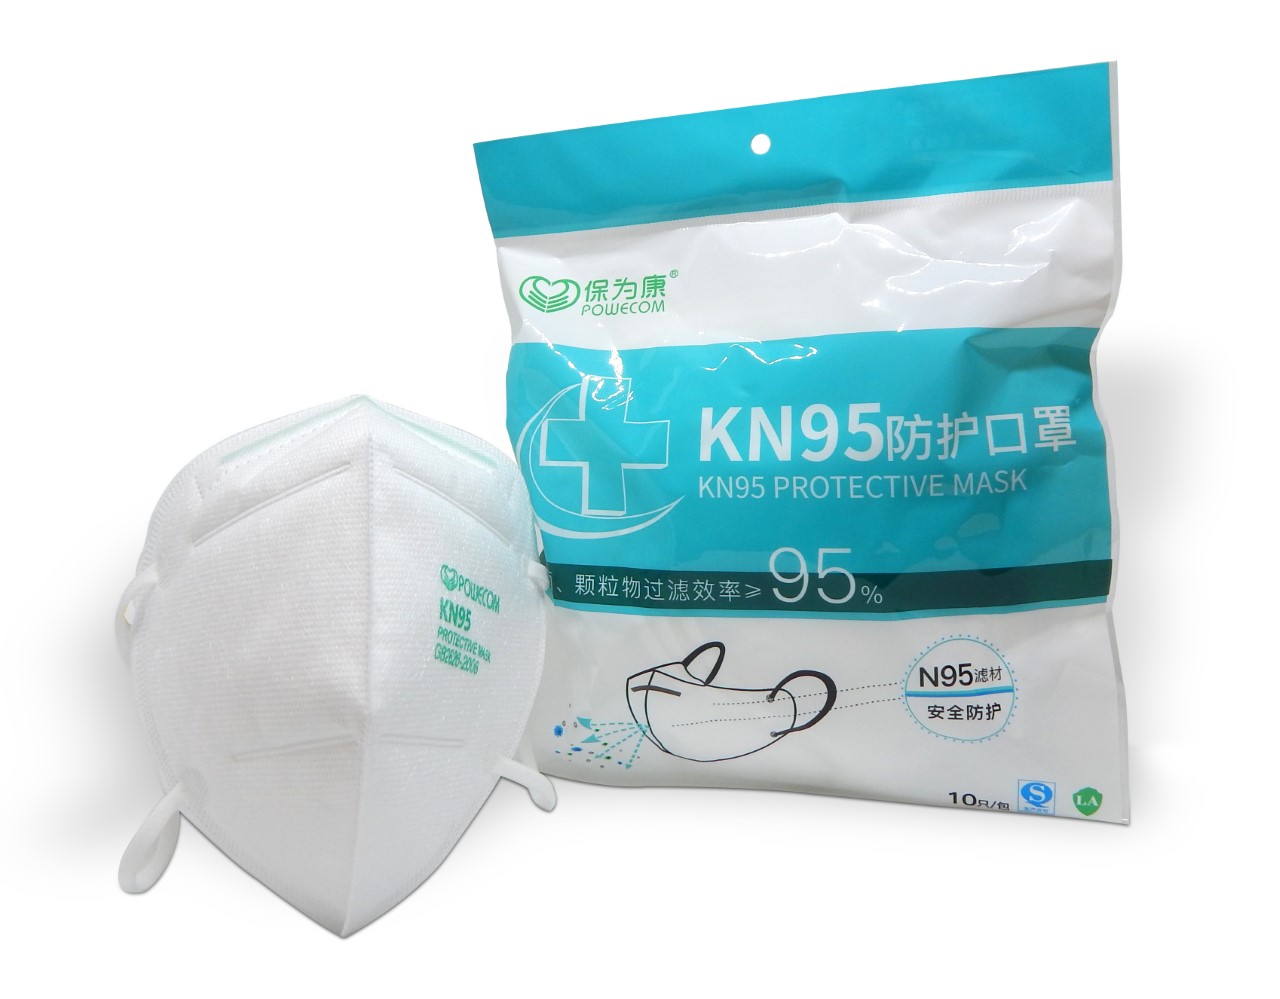 KN95 Protective Mask 95% Filtration 10/bx. - Powecom CDC Approved 